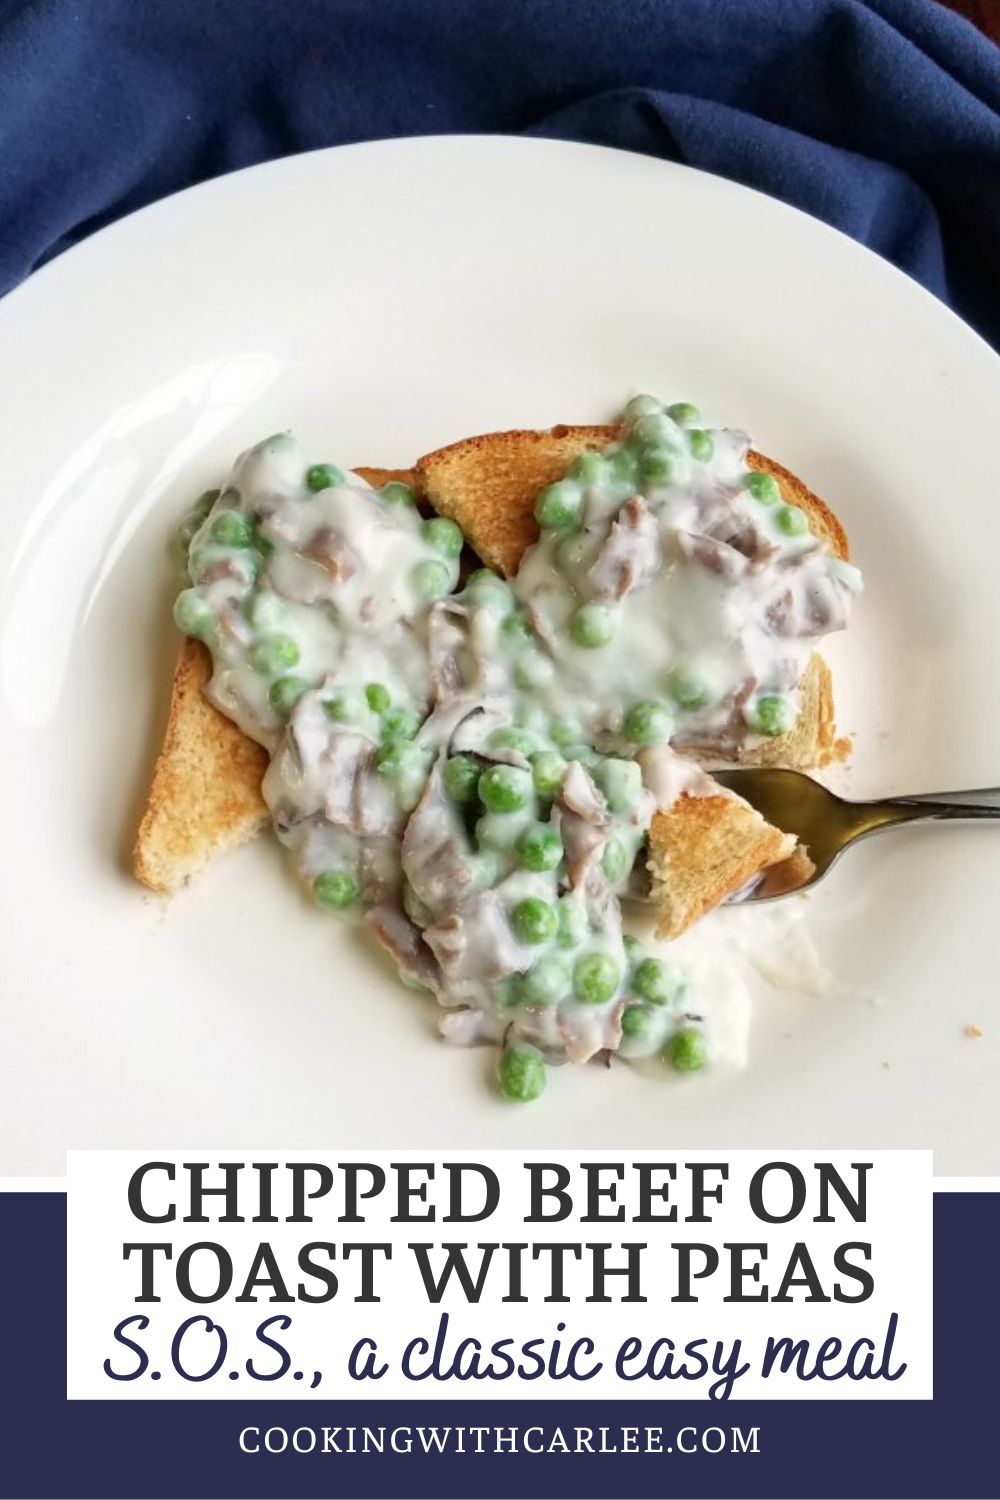 S.O.S. also known as creamed beef on toast is an old-school meal. This classic recipe was made popular by military families years ago, but is still a nostalgic favorite today. Chipped beef on toast with peas is a perfect meal for busy nights, or for when you need to stretch a dollar. 